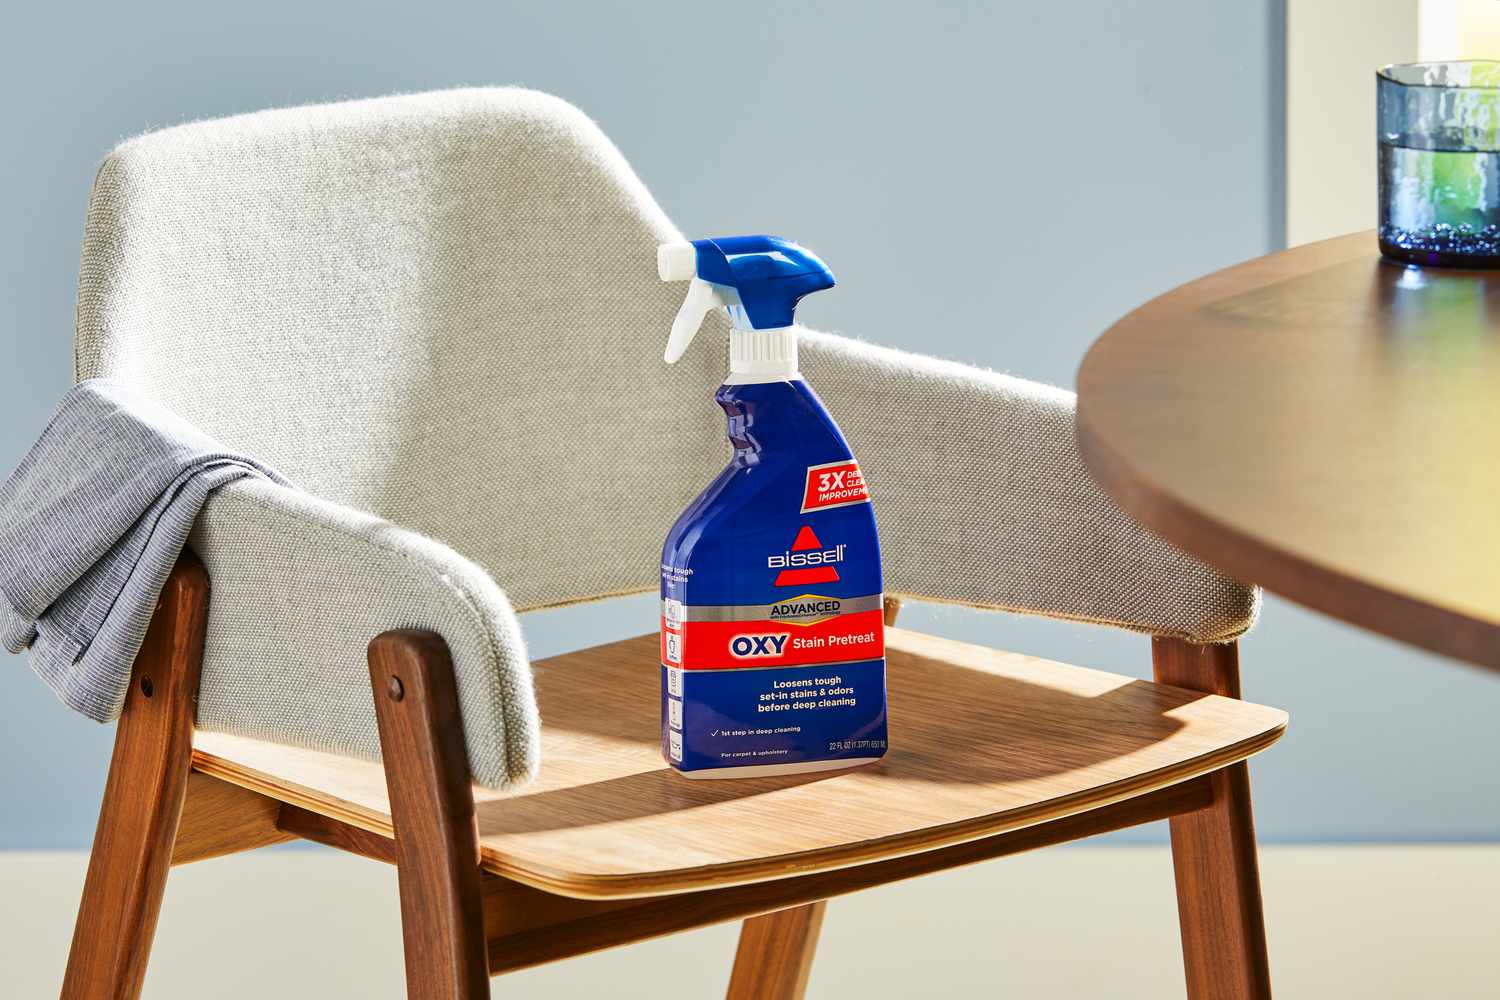 A bottle of Bissell Advanced Oxy Stain Pretreat sitting on a modern dining chair.